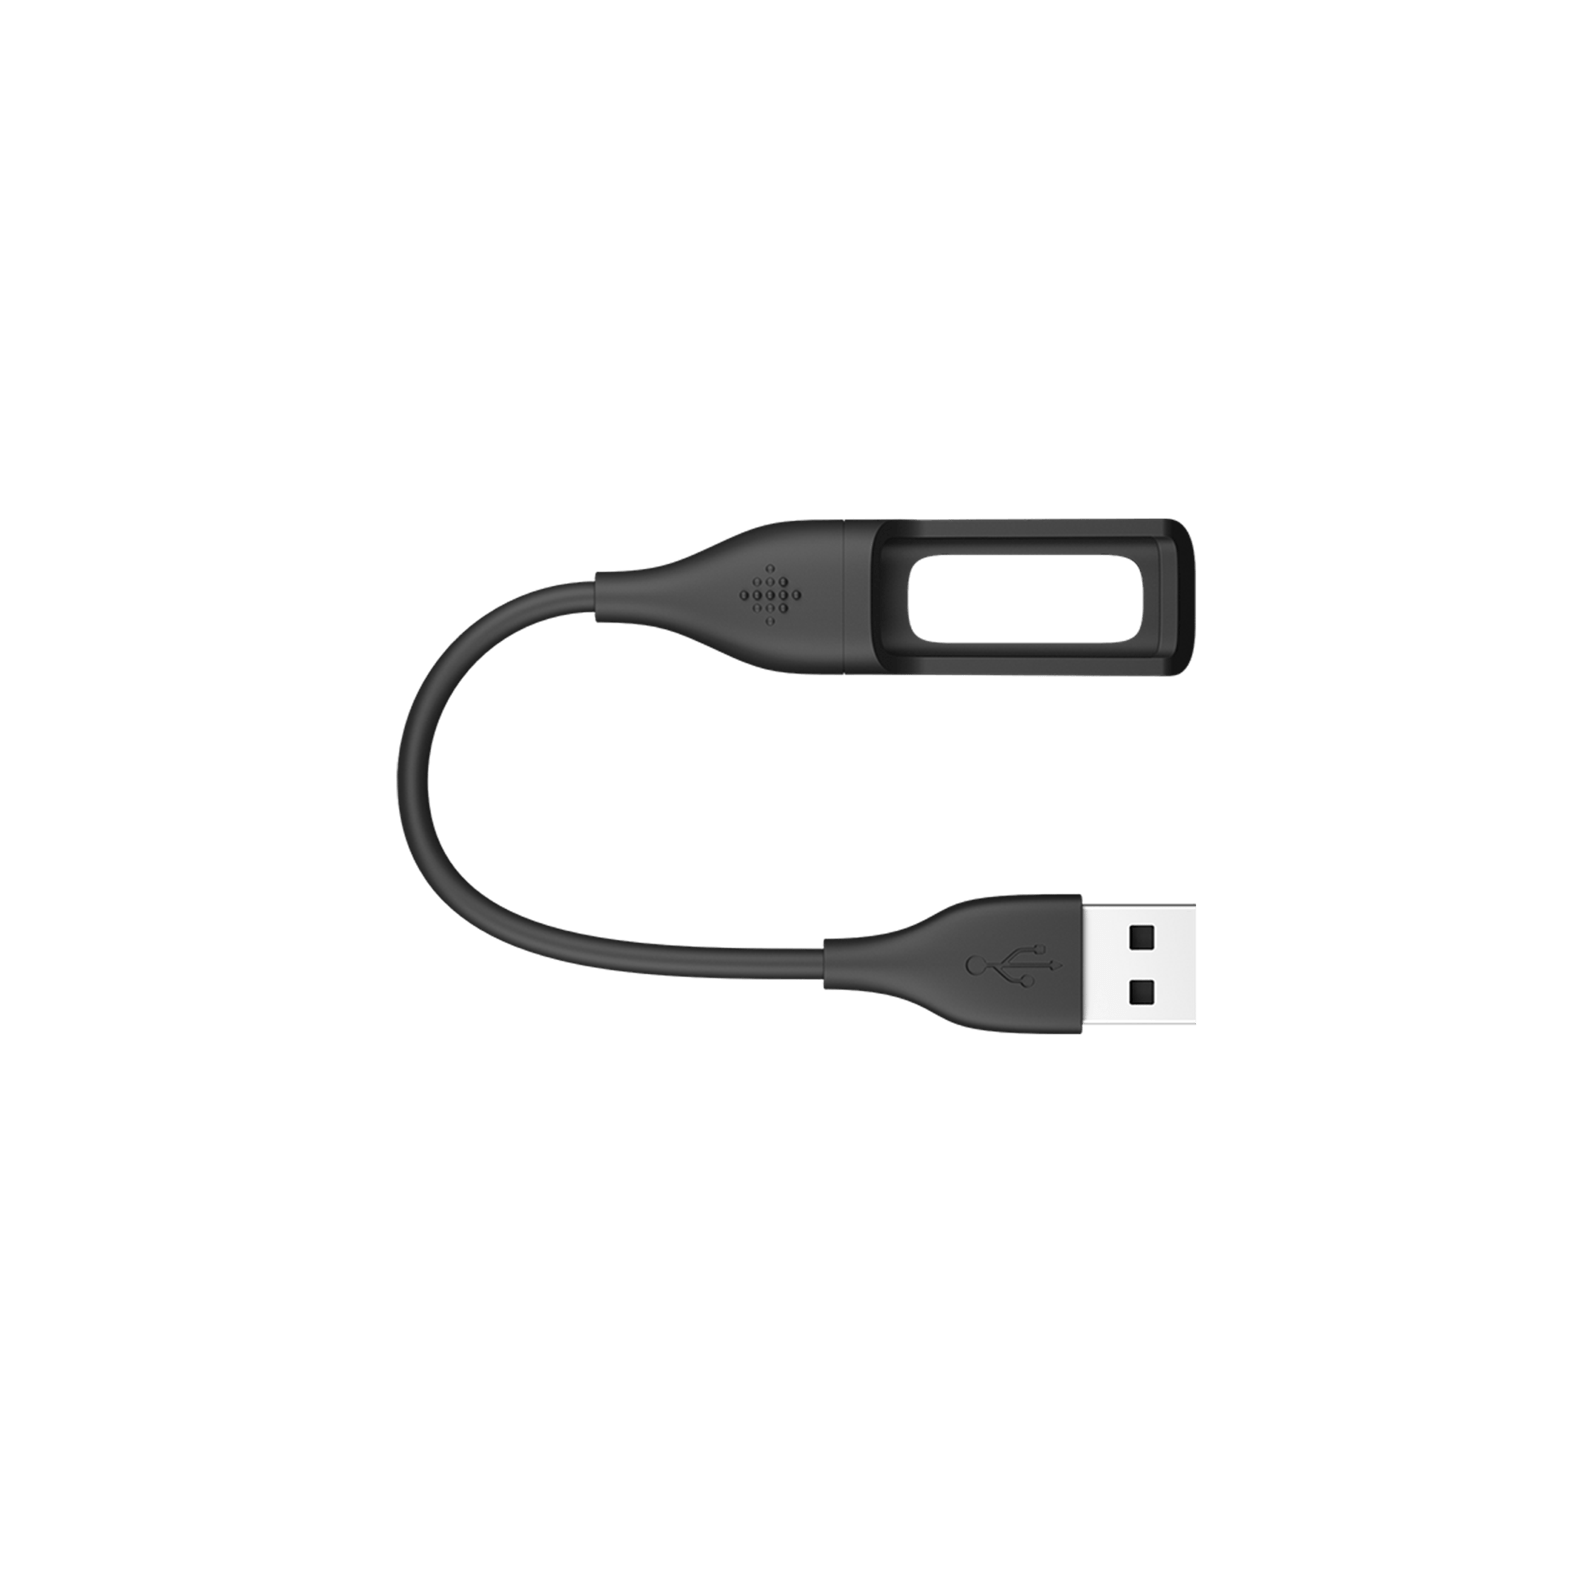 buy fitbit charger near me